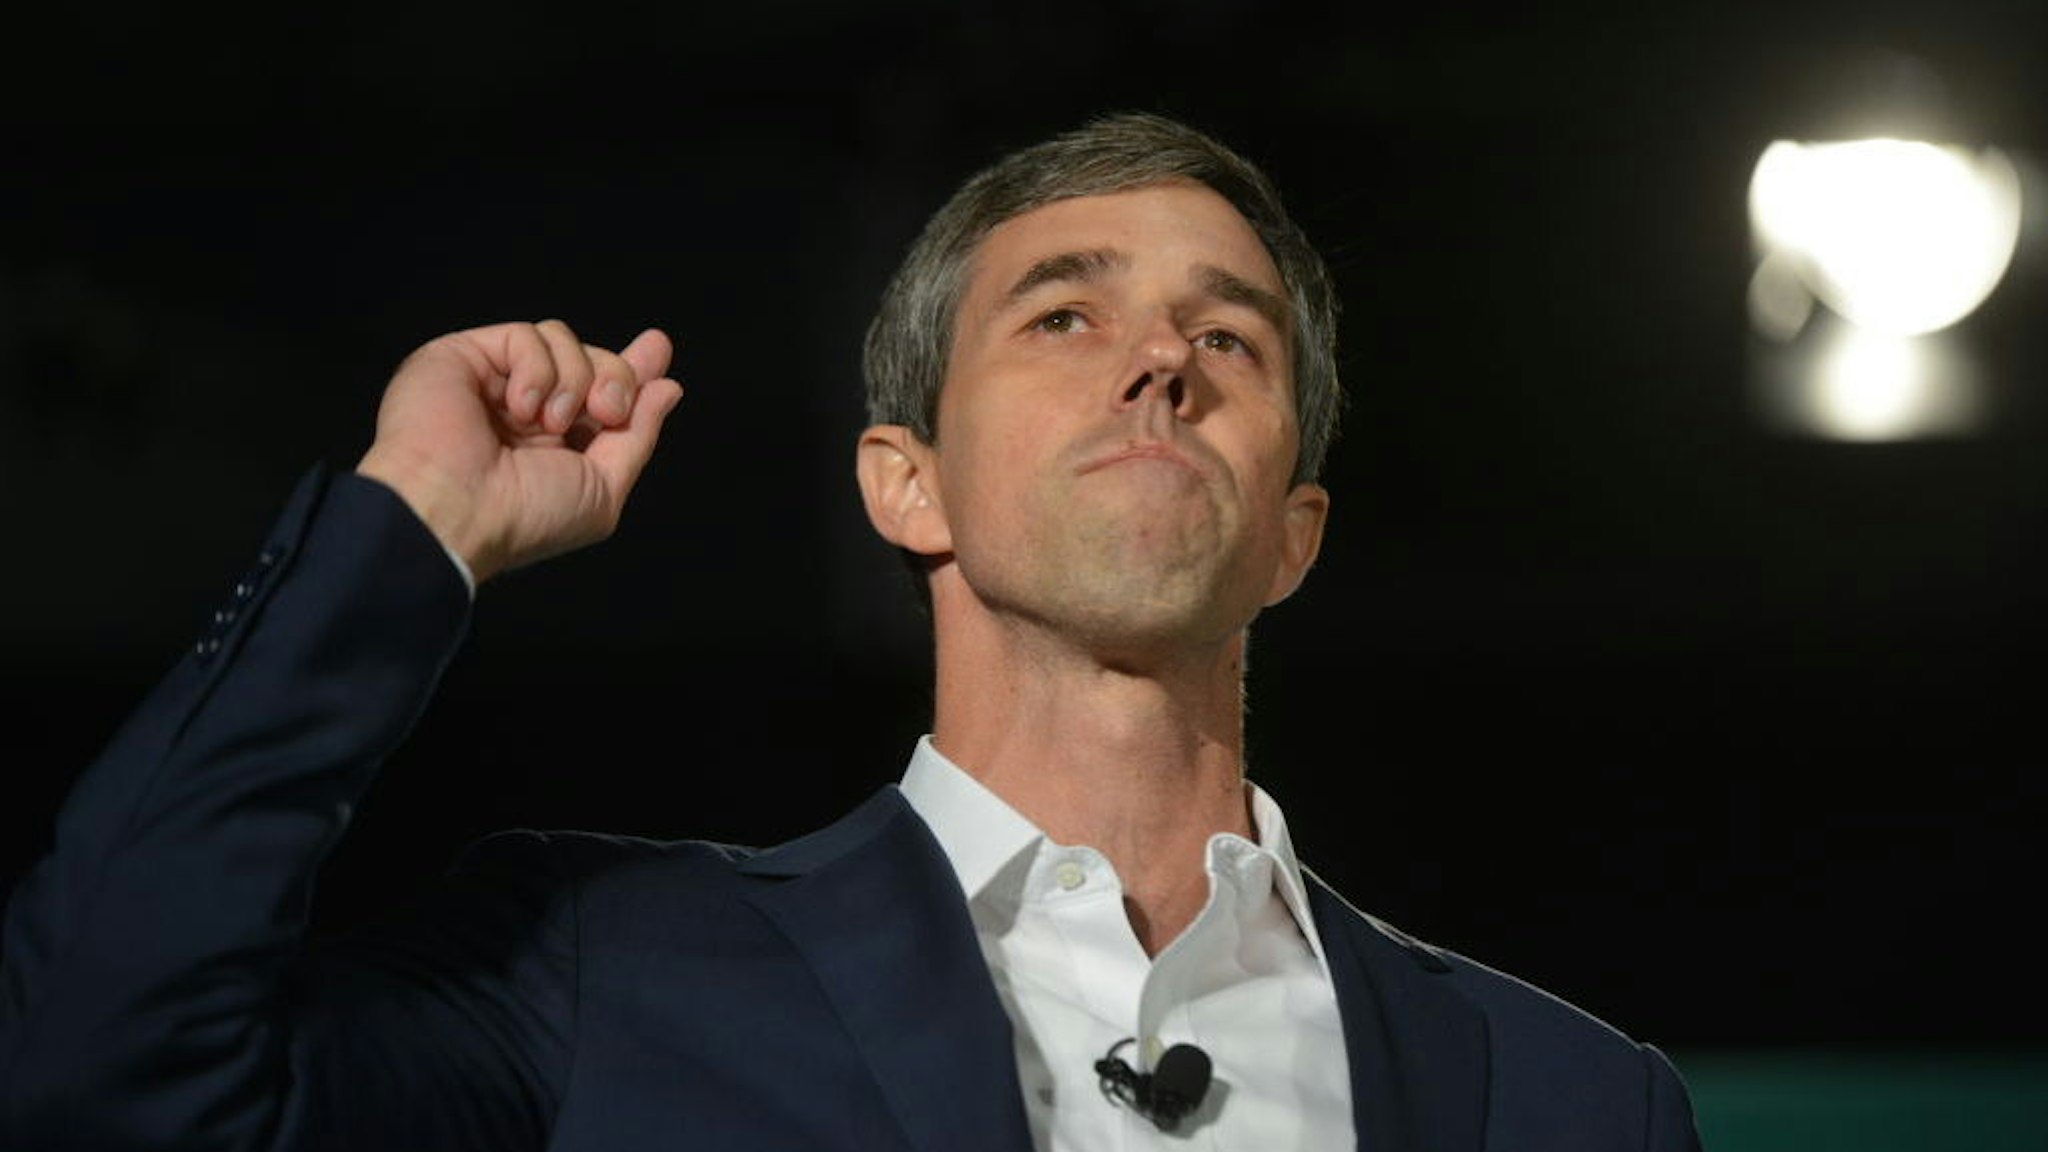 Beto O'Rourke, former Representative from Texas and 2020 Democratic presidential candidate, speaks during the American Federation of State, County & Municipal Employees (AFSCME) Public Service Forum in Las Vegas, Nevada, U.S., on Saturday, Aug. 3, 2019.